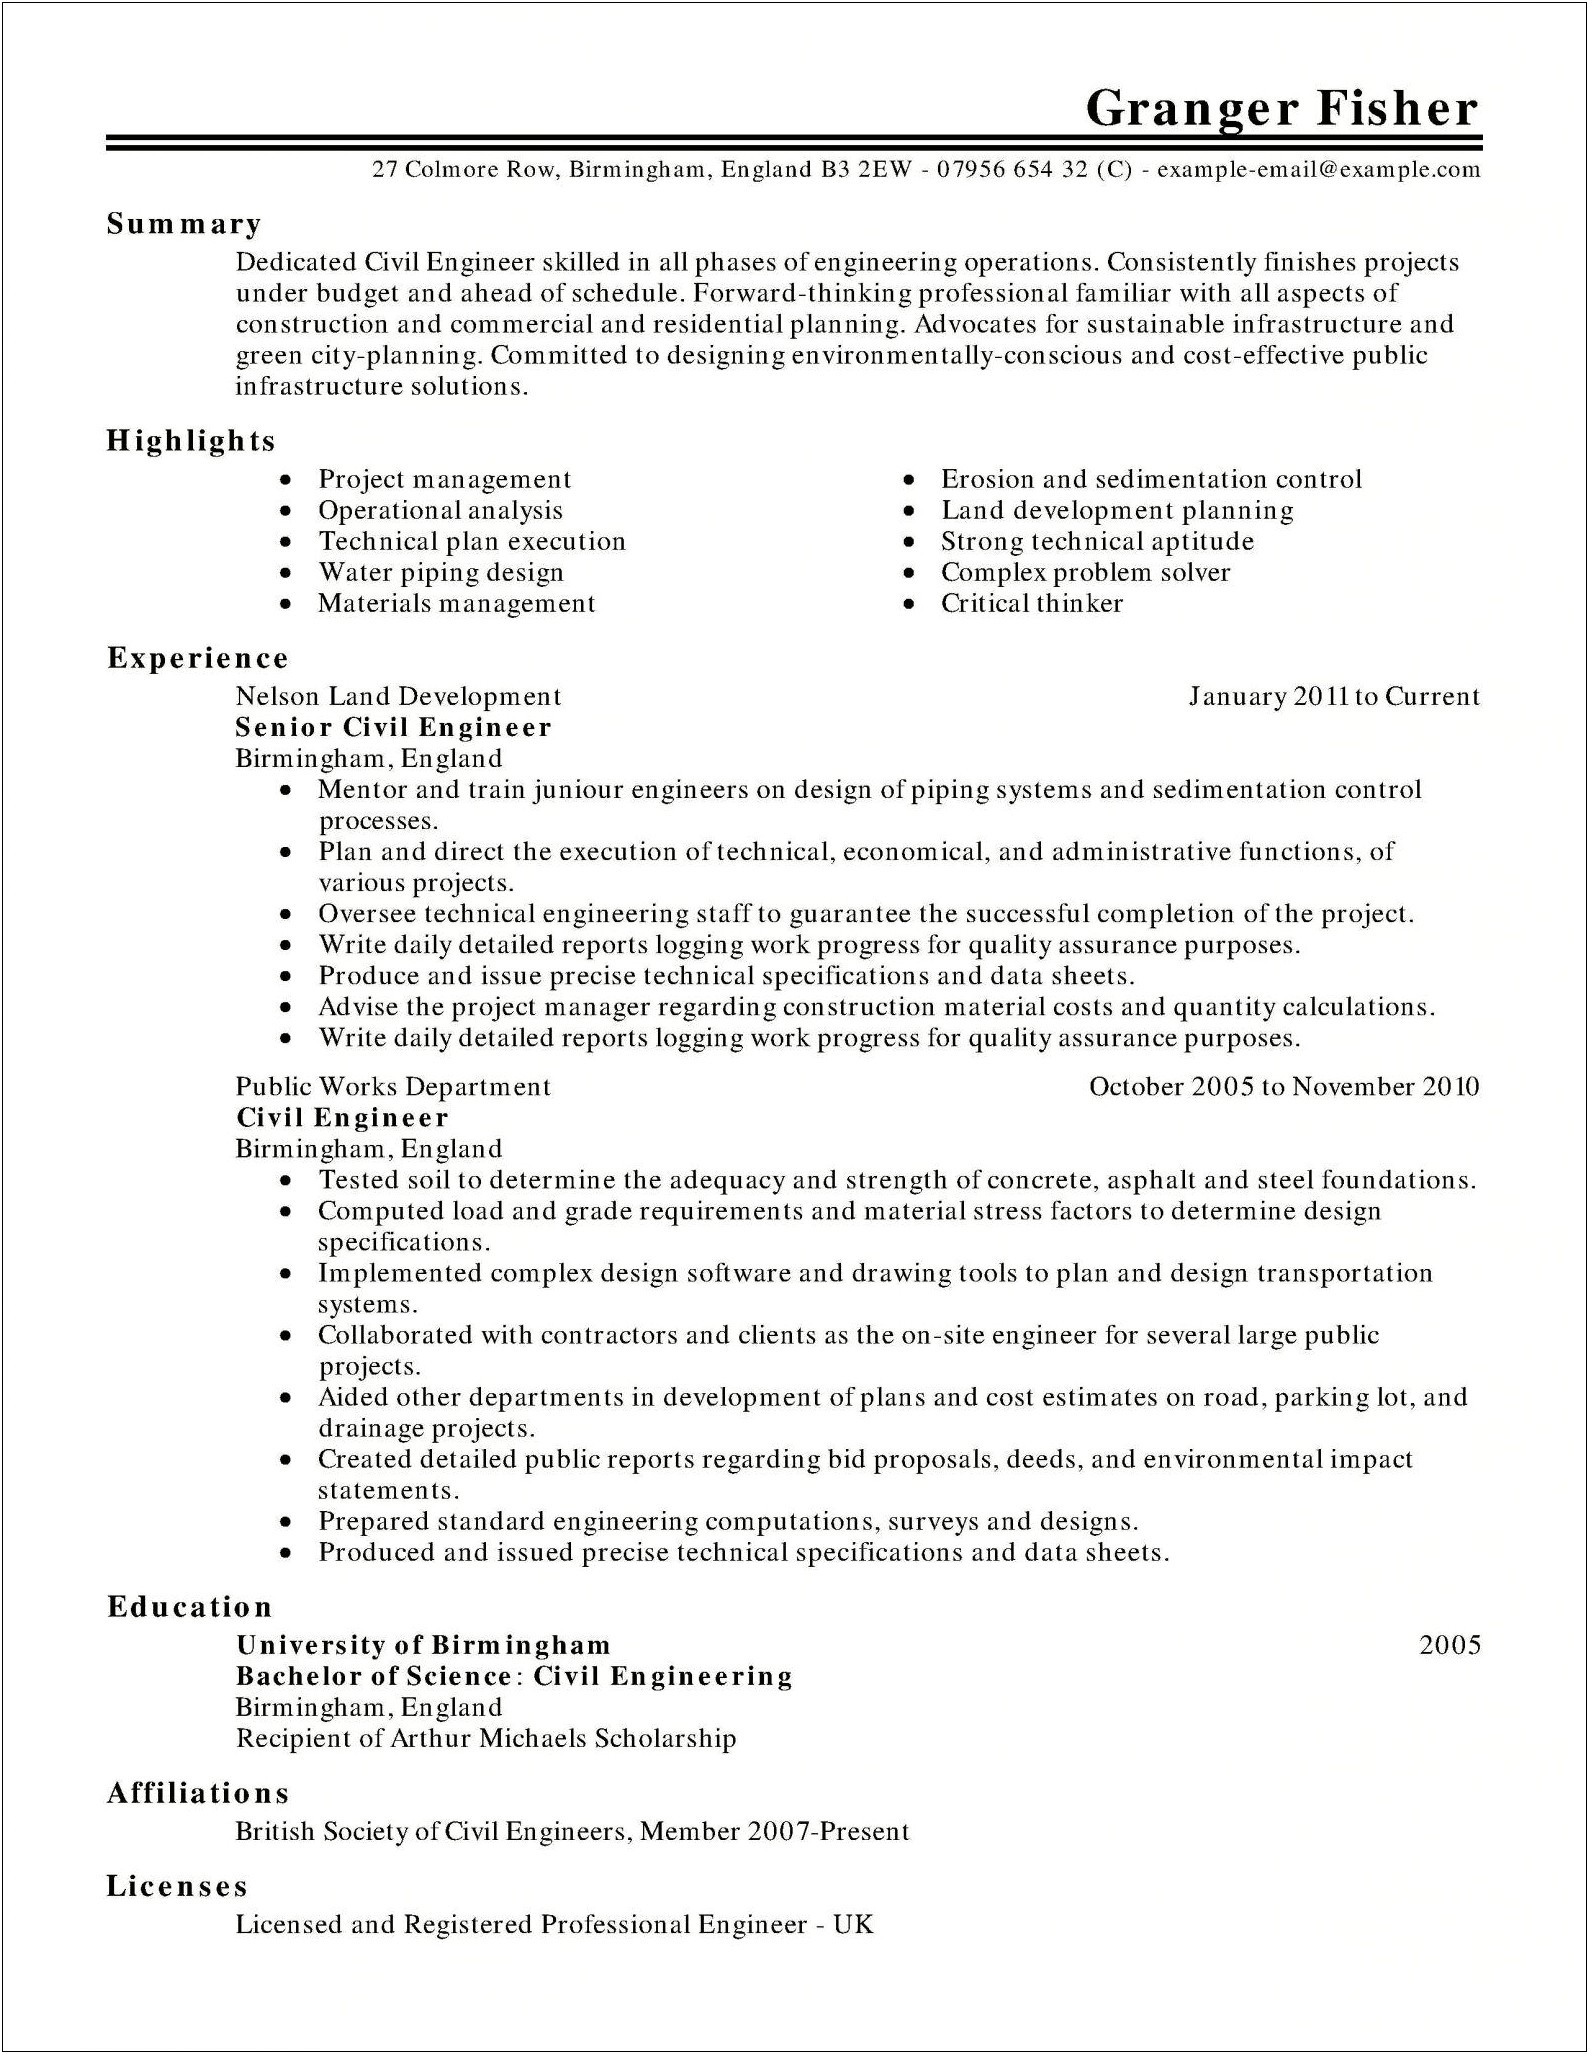 Resume Summary Statement Examples For Civil Engineer